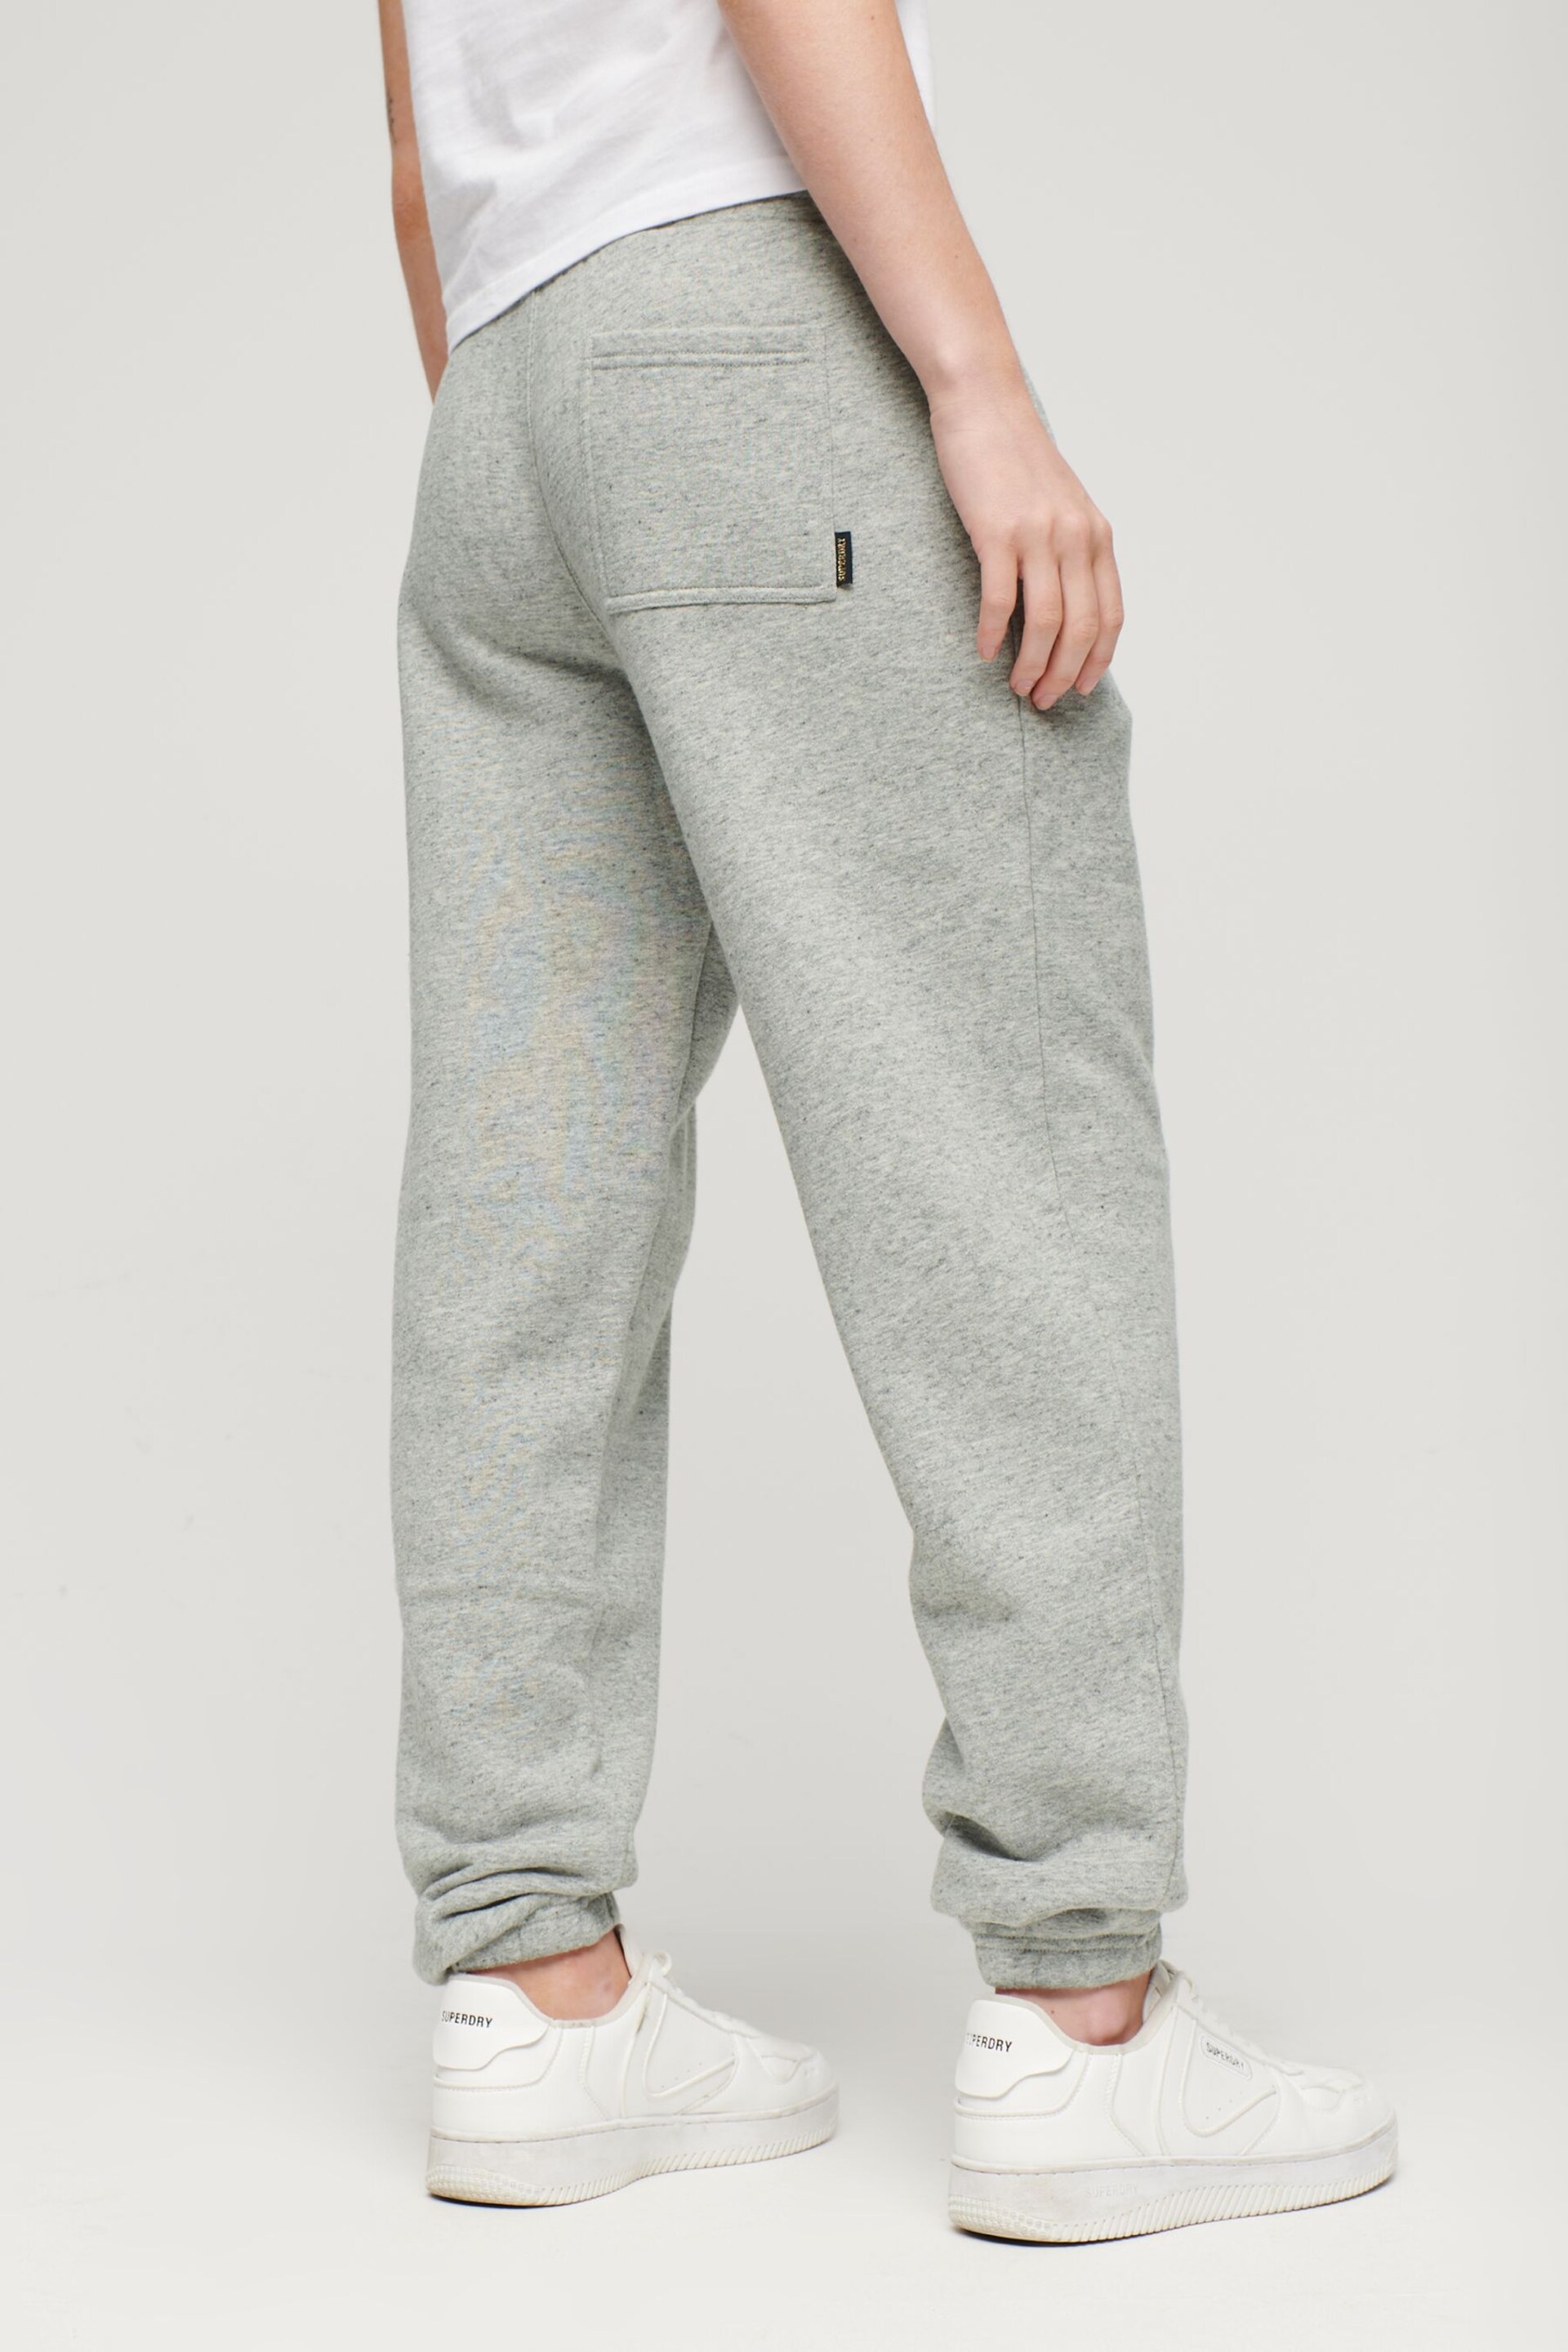 Superdry Grey/White Athletic College Logo Joggers - Image 2 of 4